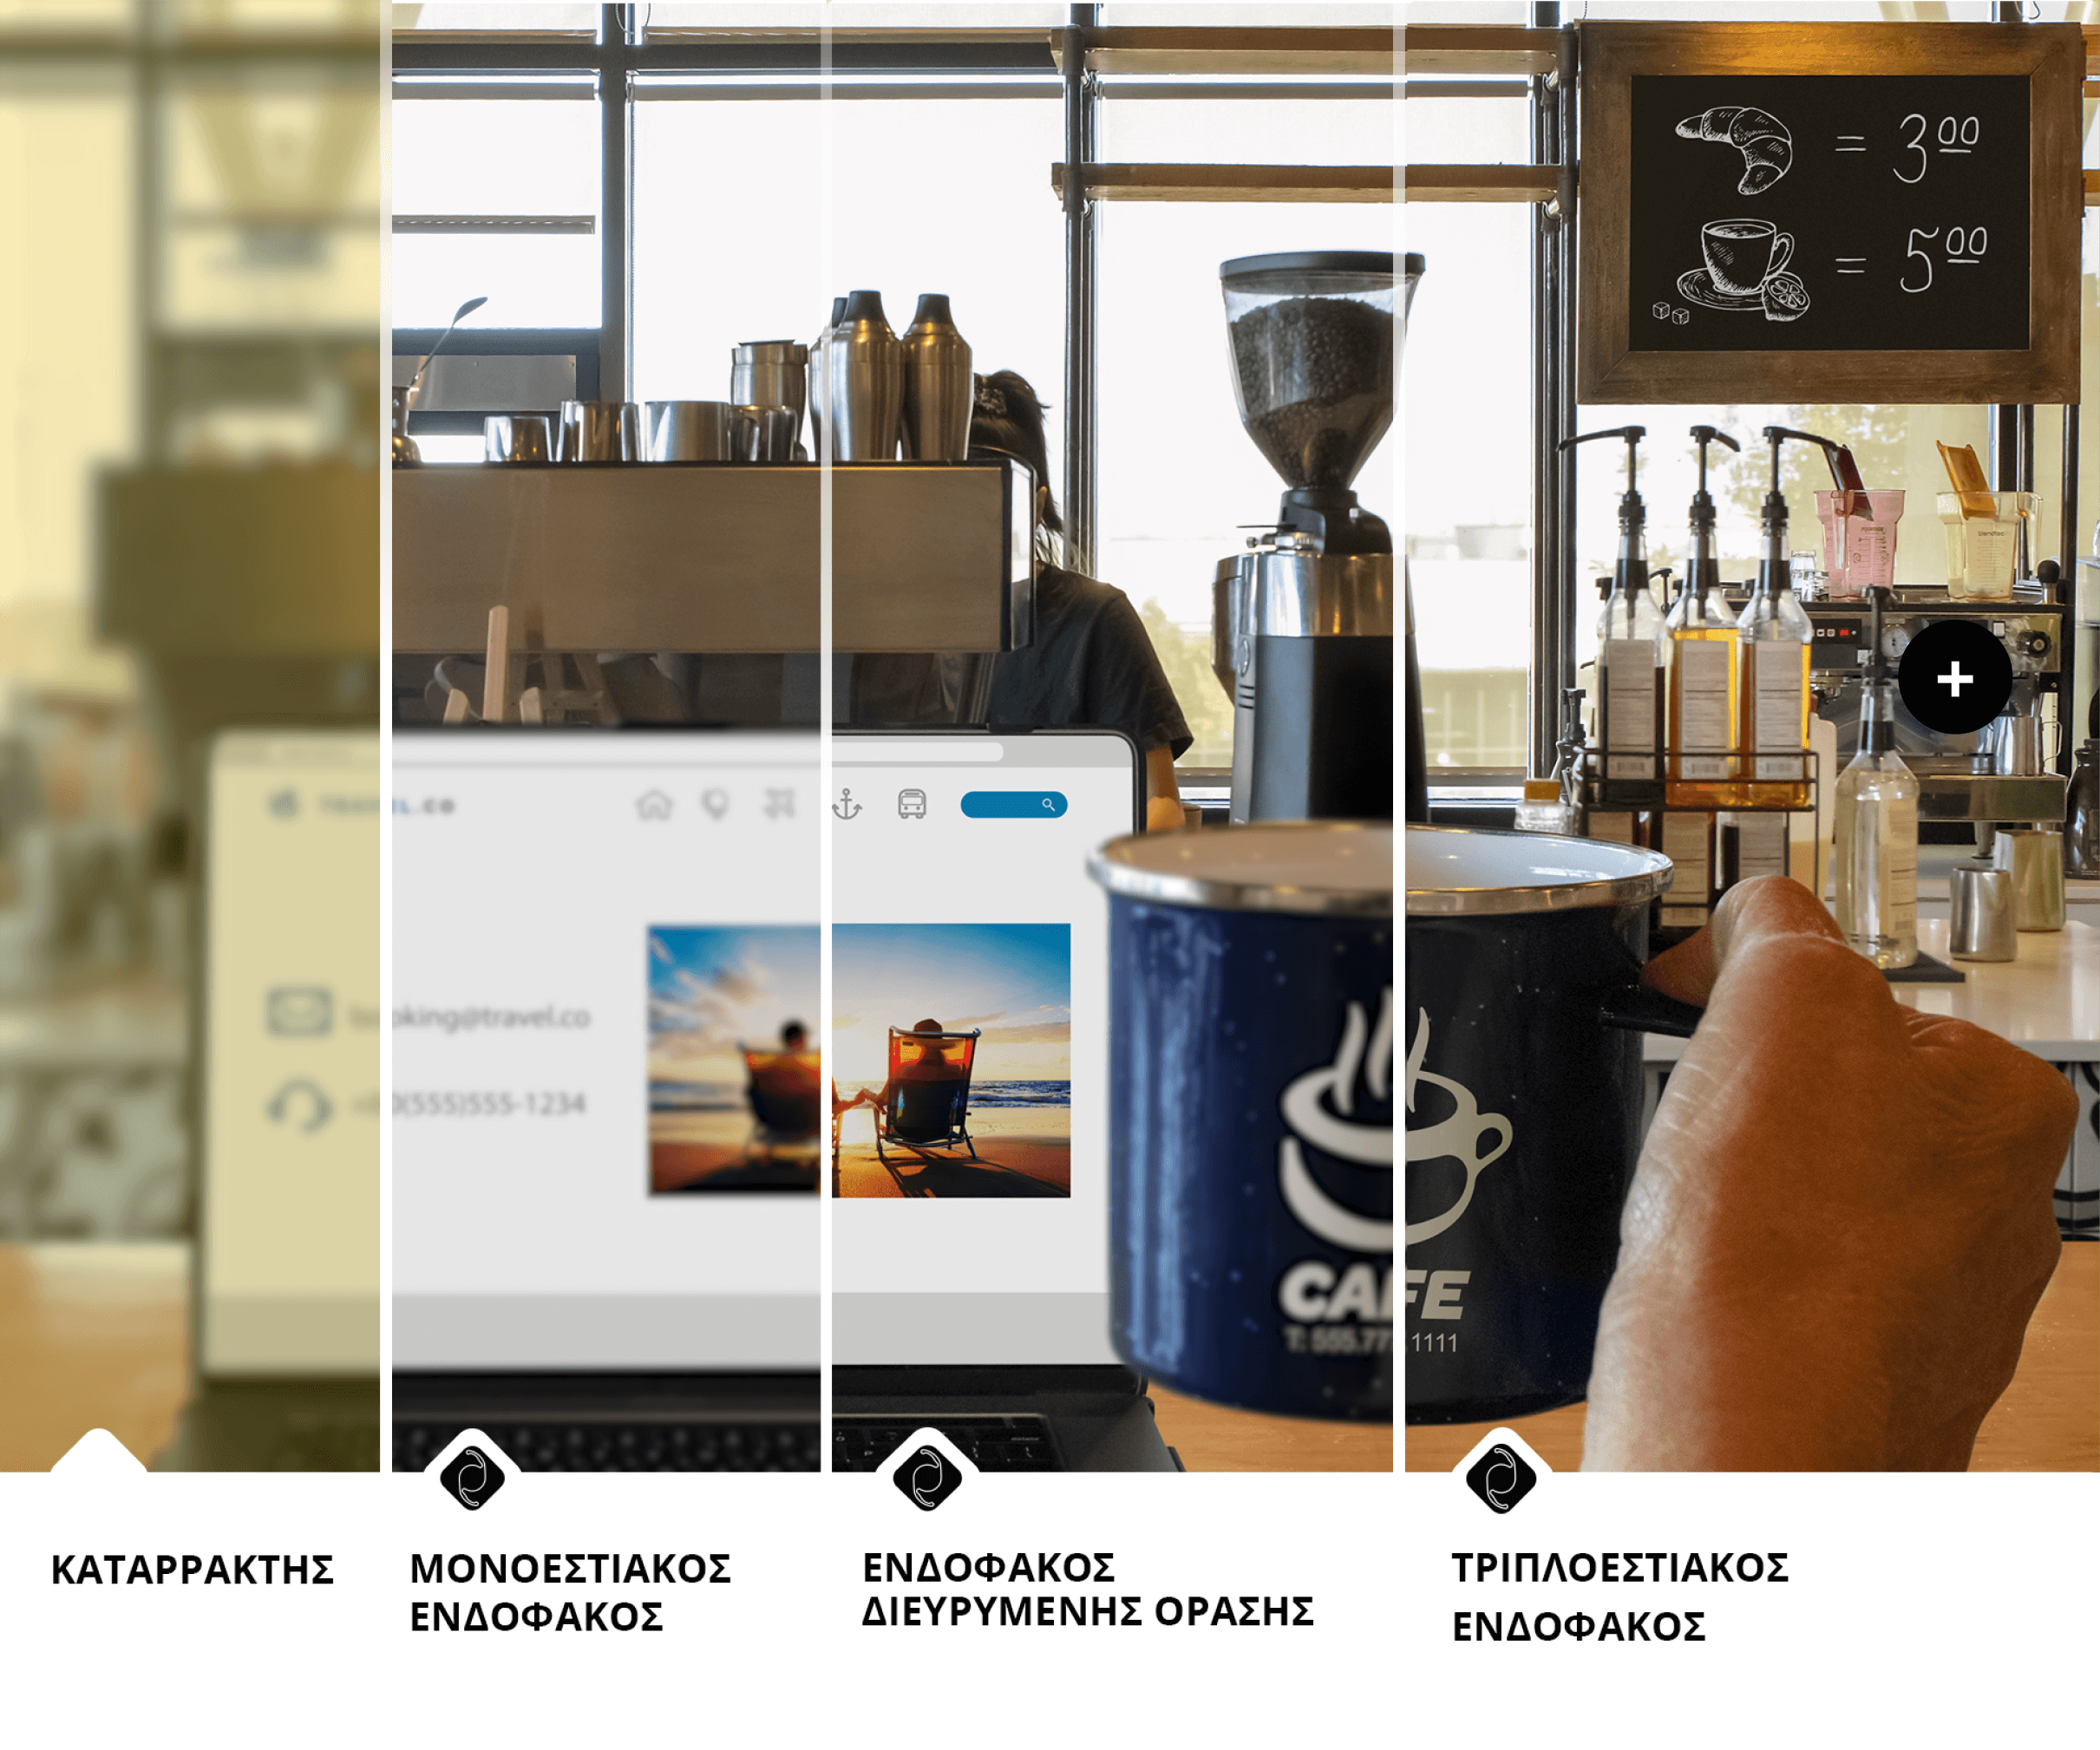 Coffee shop with a view from the counter of coffee machines and other ingredients. A laptop is open on the countertop and an individual’s hand holds up a coffee mug to the right of the laptop screen. The image is split into 4 sections to show the difference between an individual’s vision quality with cataracts versus vision with a Monofocal Lens, Extended Vision Lens, or Trifocal Lens. The far-left section of the image is blurry with a yellow tinge to illustrate duller vision associated with cataracts. The 3 remaining sections are significantly clearer to show the visual benefits of using an IOL option to treat cataracts.